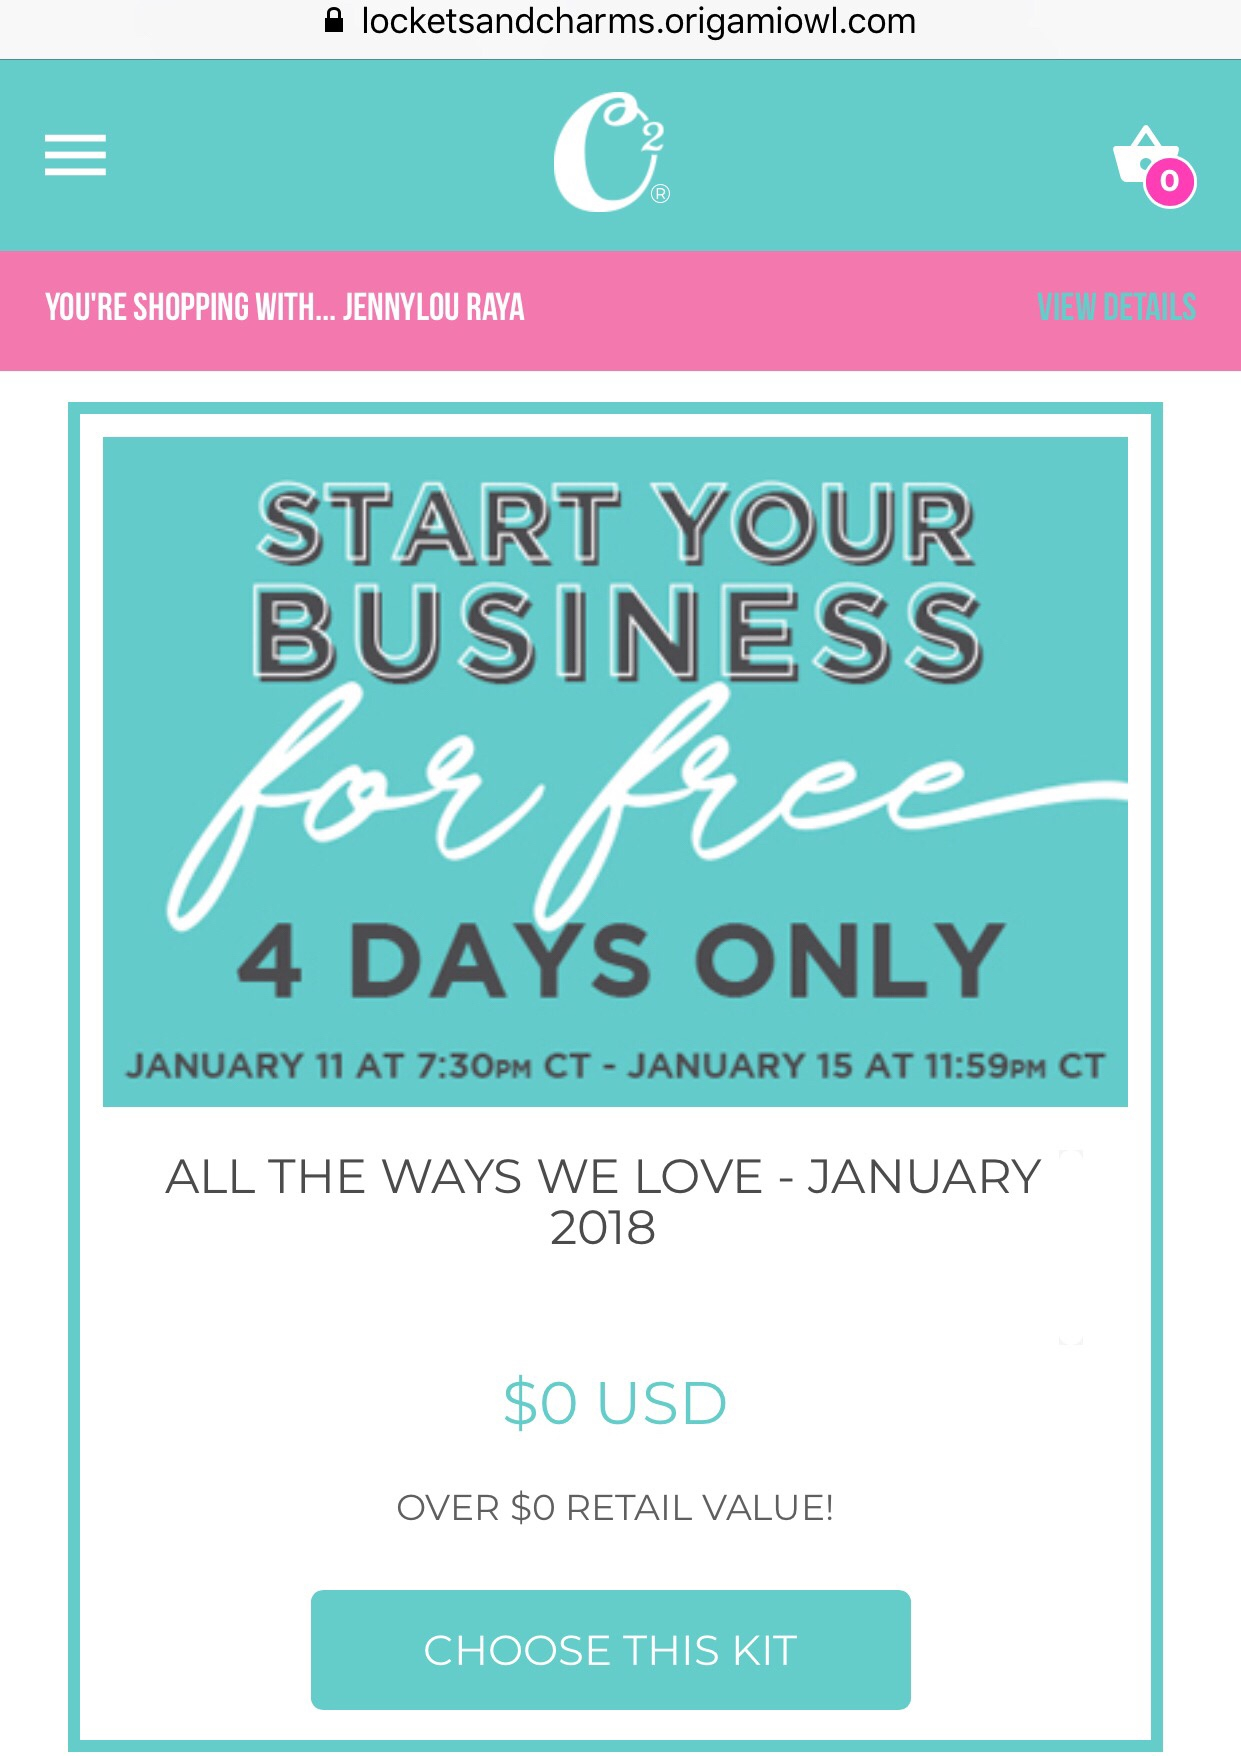 Origami Owl Prices 4 Days To Join Origami Owl For Free San Diego Origami Owl Lockets